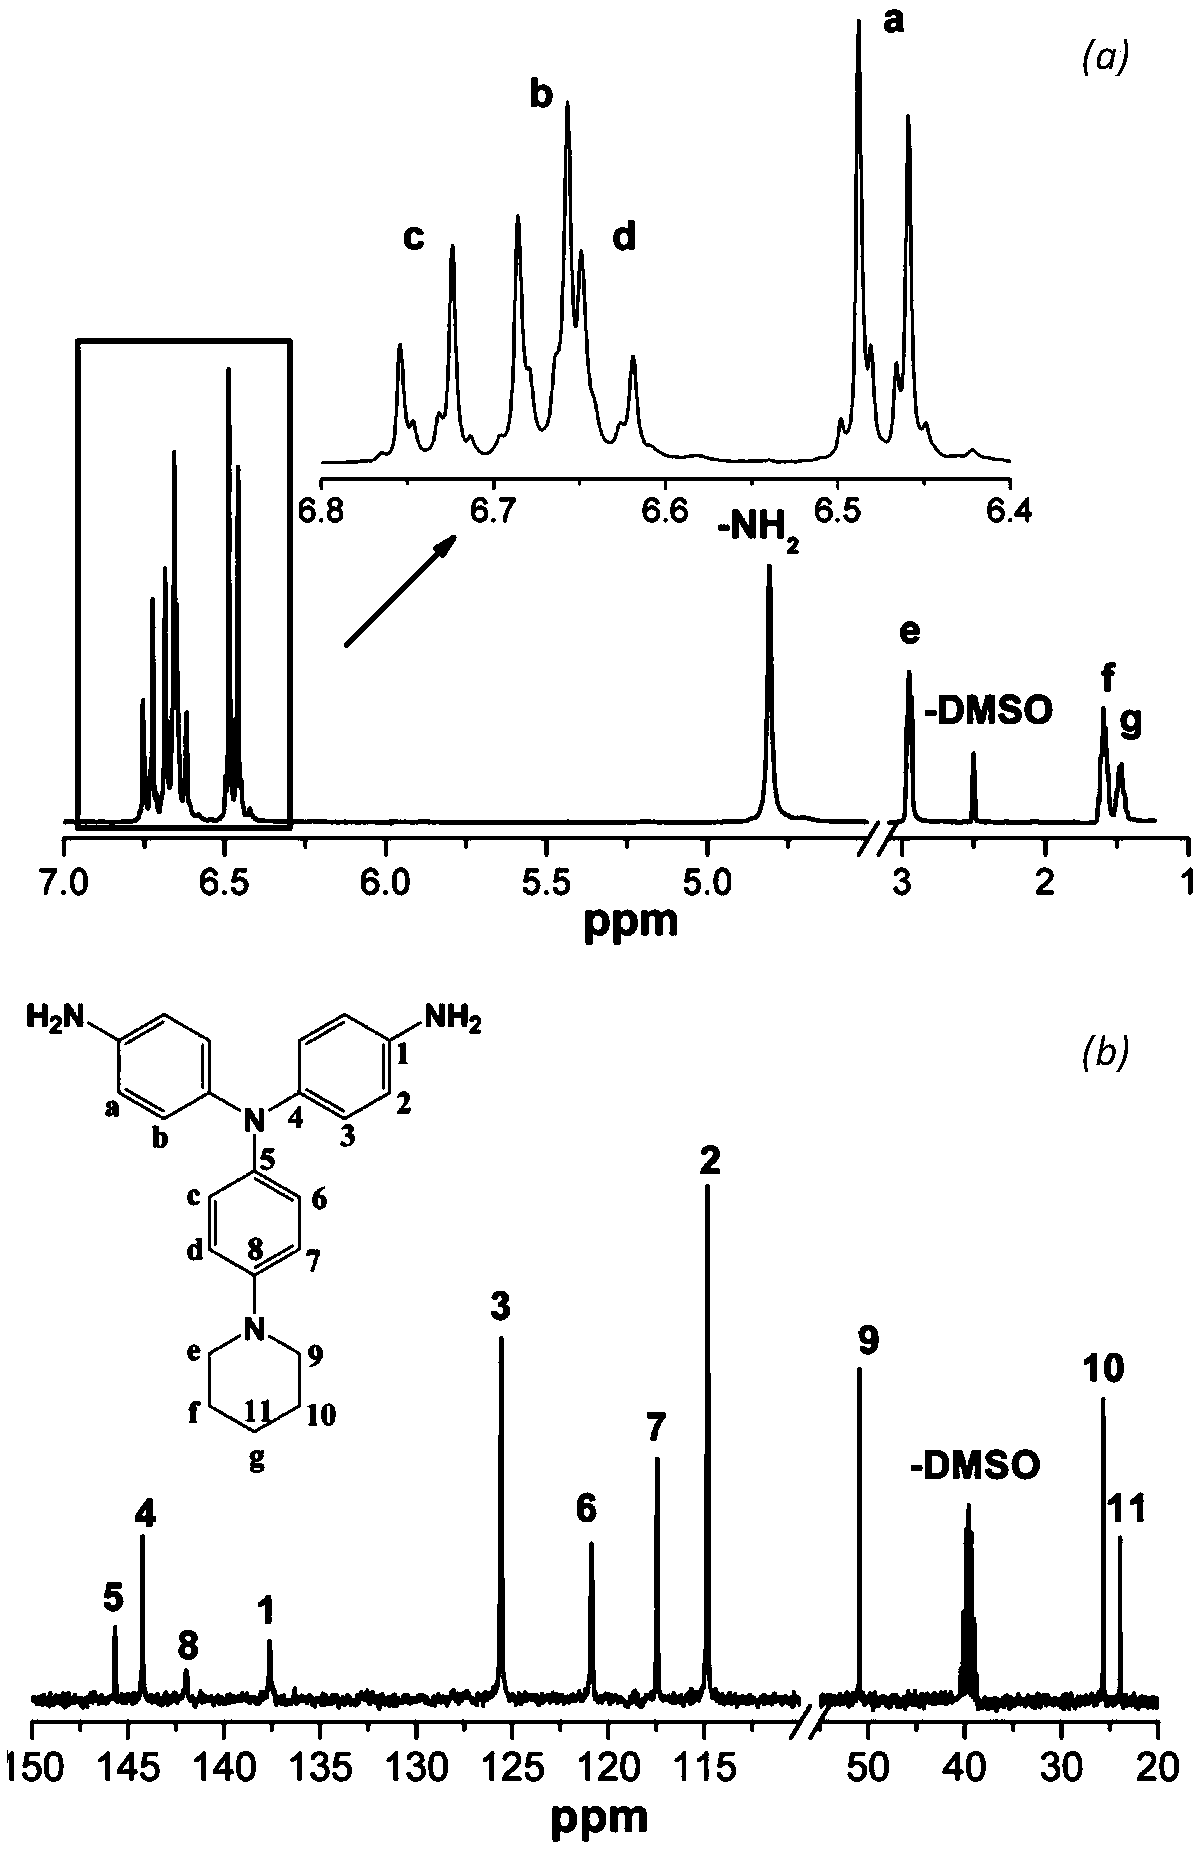 Diamine monomer with triphenylamine structure containing p-substituted cyclic amine, preparation method and application of diamine monomer